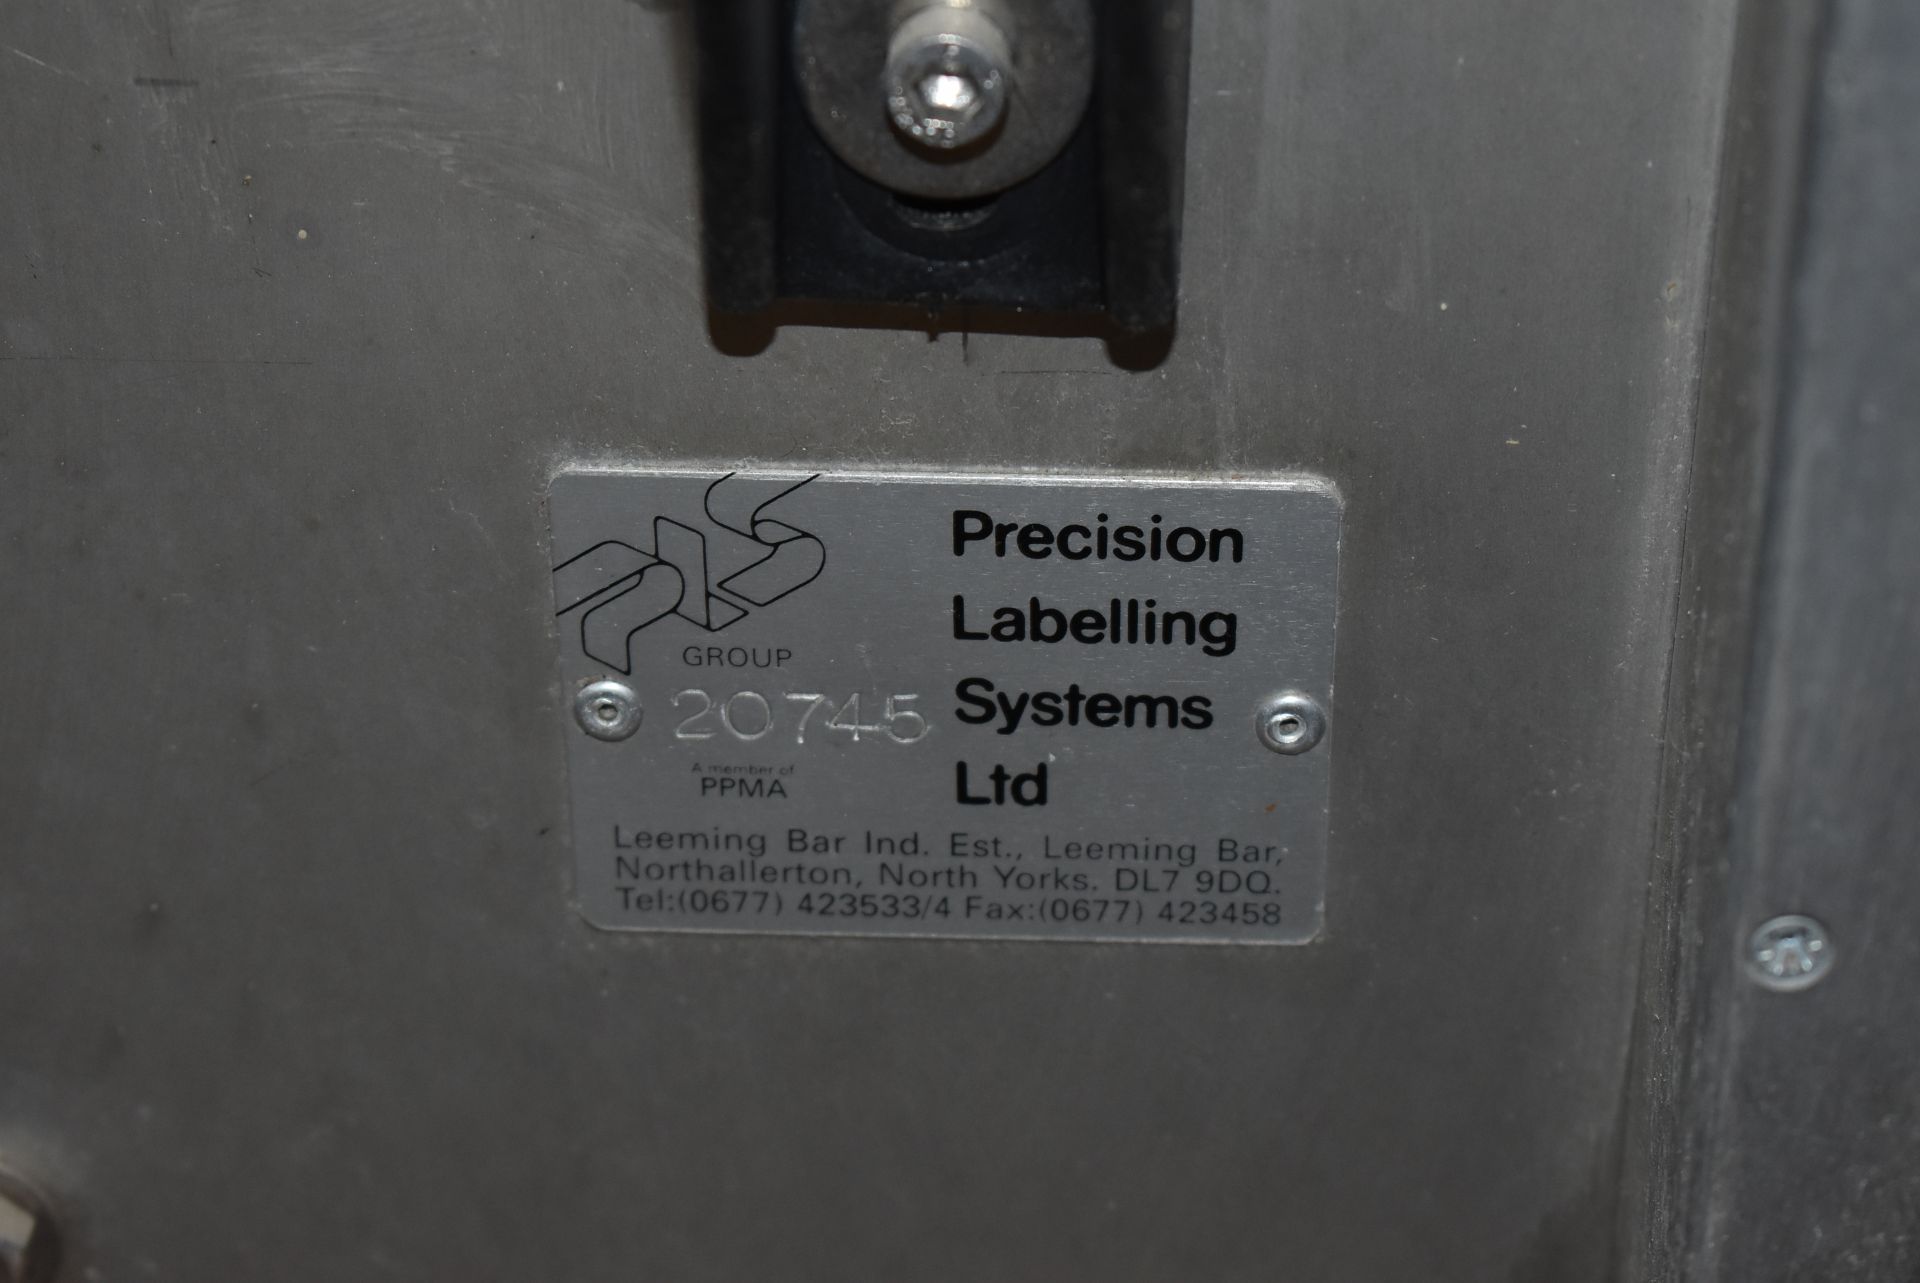 1 x Precision Labelling Systems Conveyor - Part Number 20745 - Approx Size: H100 x W250 cms - - Image 22 of 25